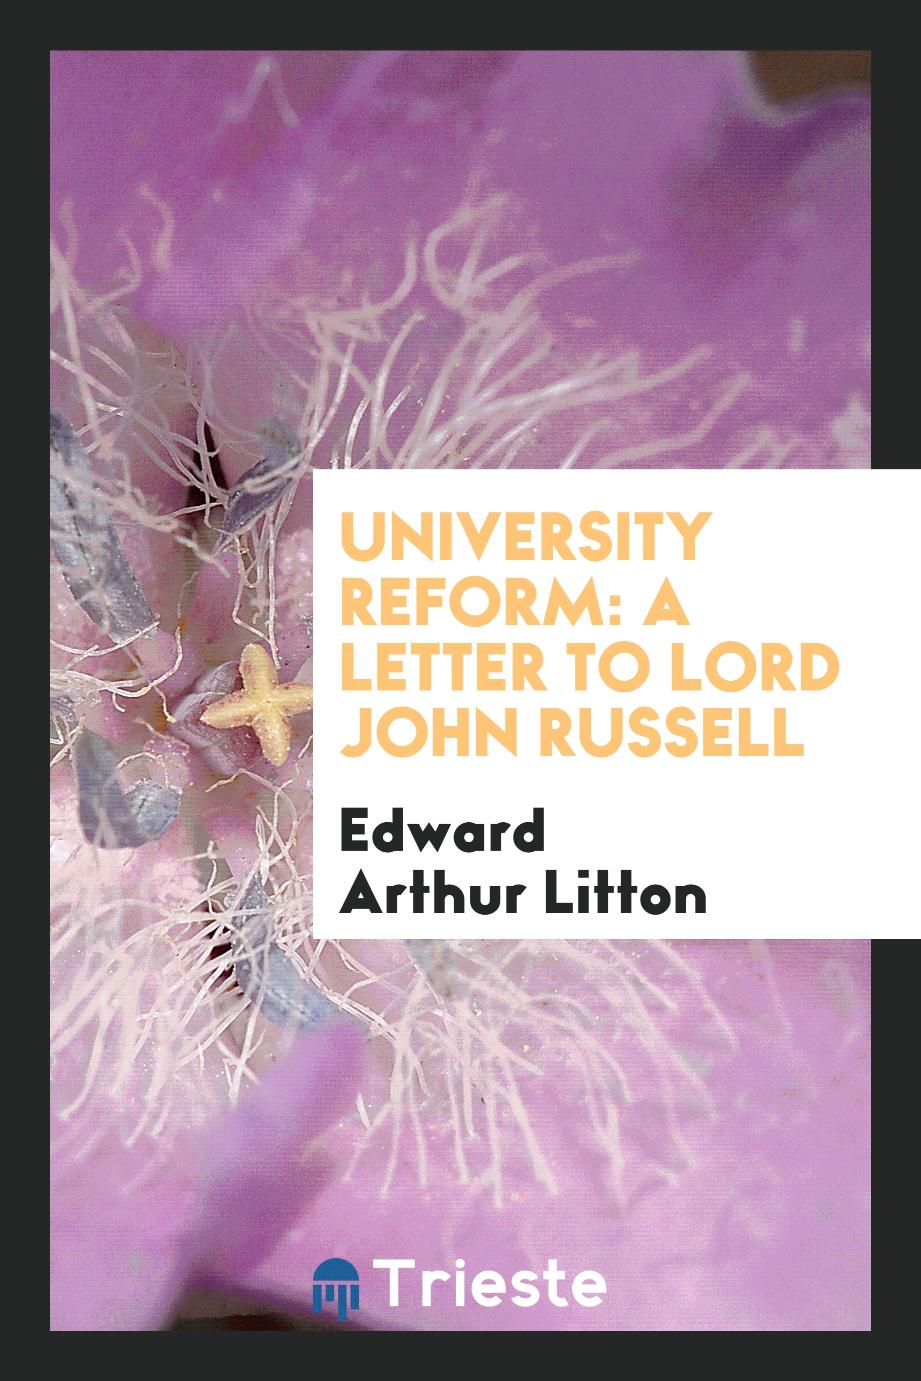 University Reform: A Letter to Lord John Russell